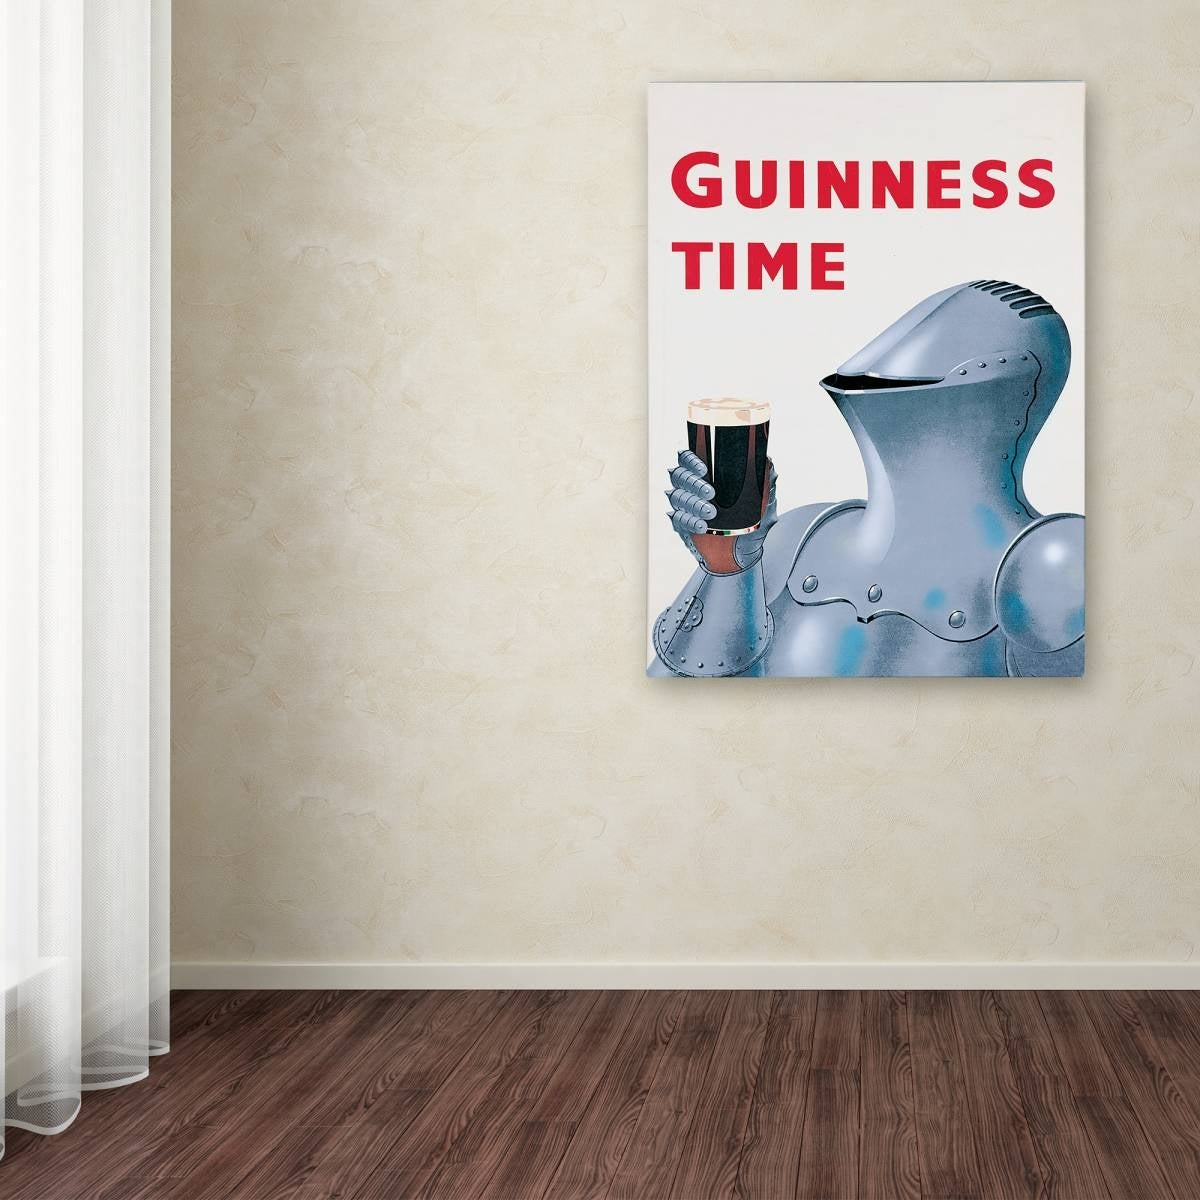 Guinness Brewery 'Guinness Time IV' Canvas Art by Guinness.